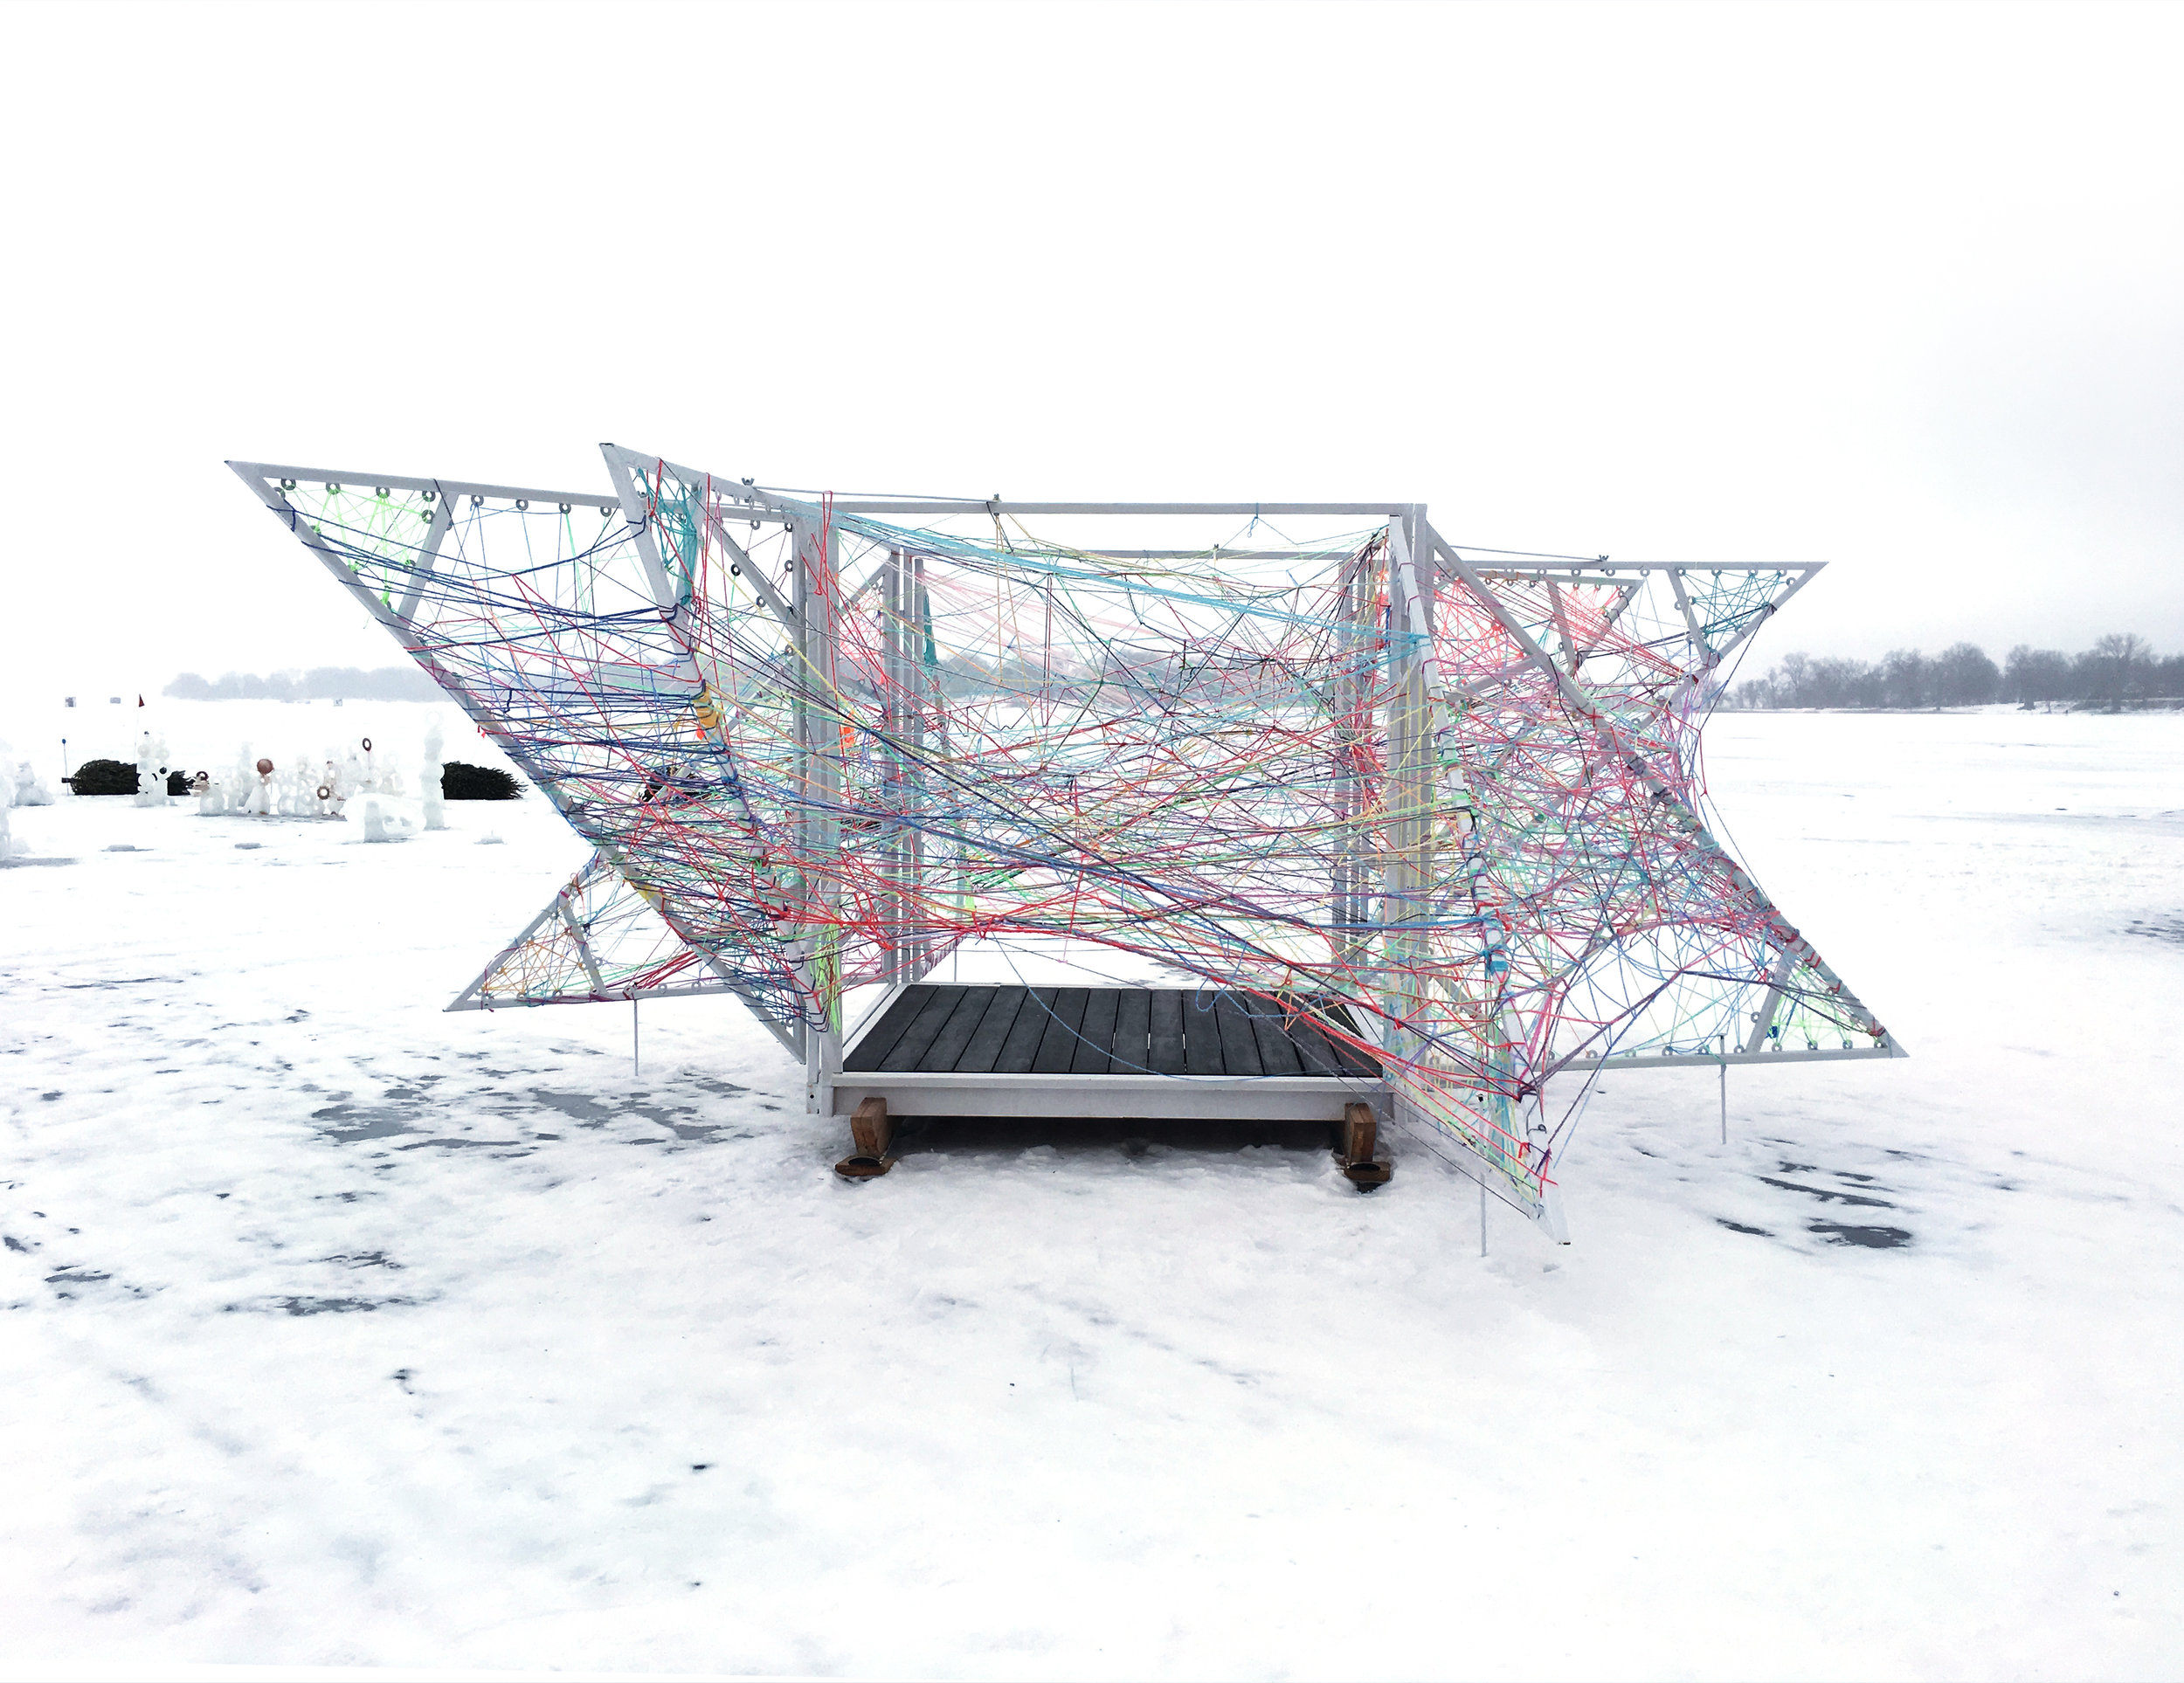 NewStudio Architecture designed the String Box Shanty to encourage visitors to thread string on the white-painted steel structure 